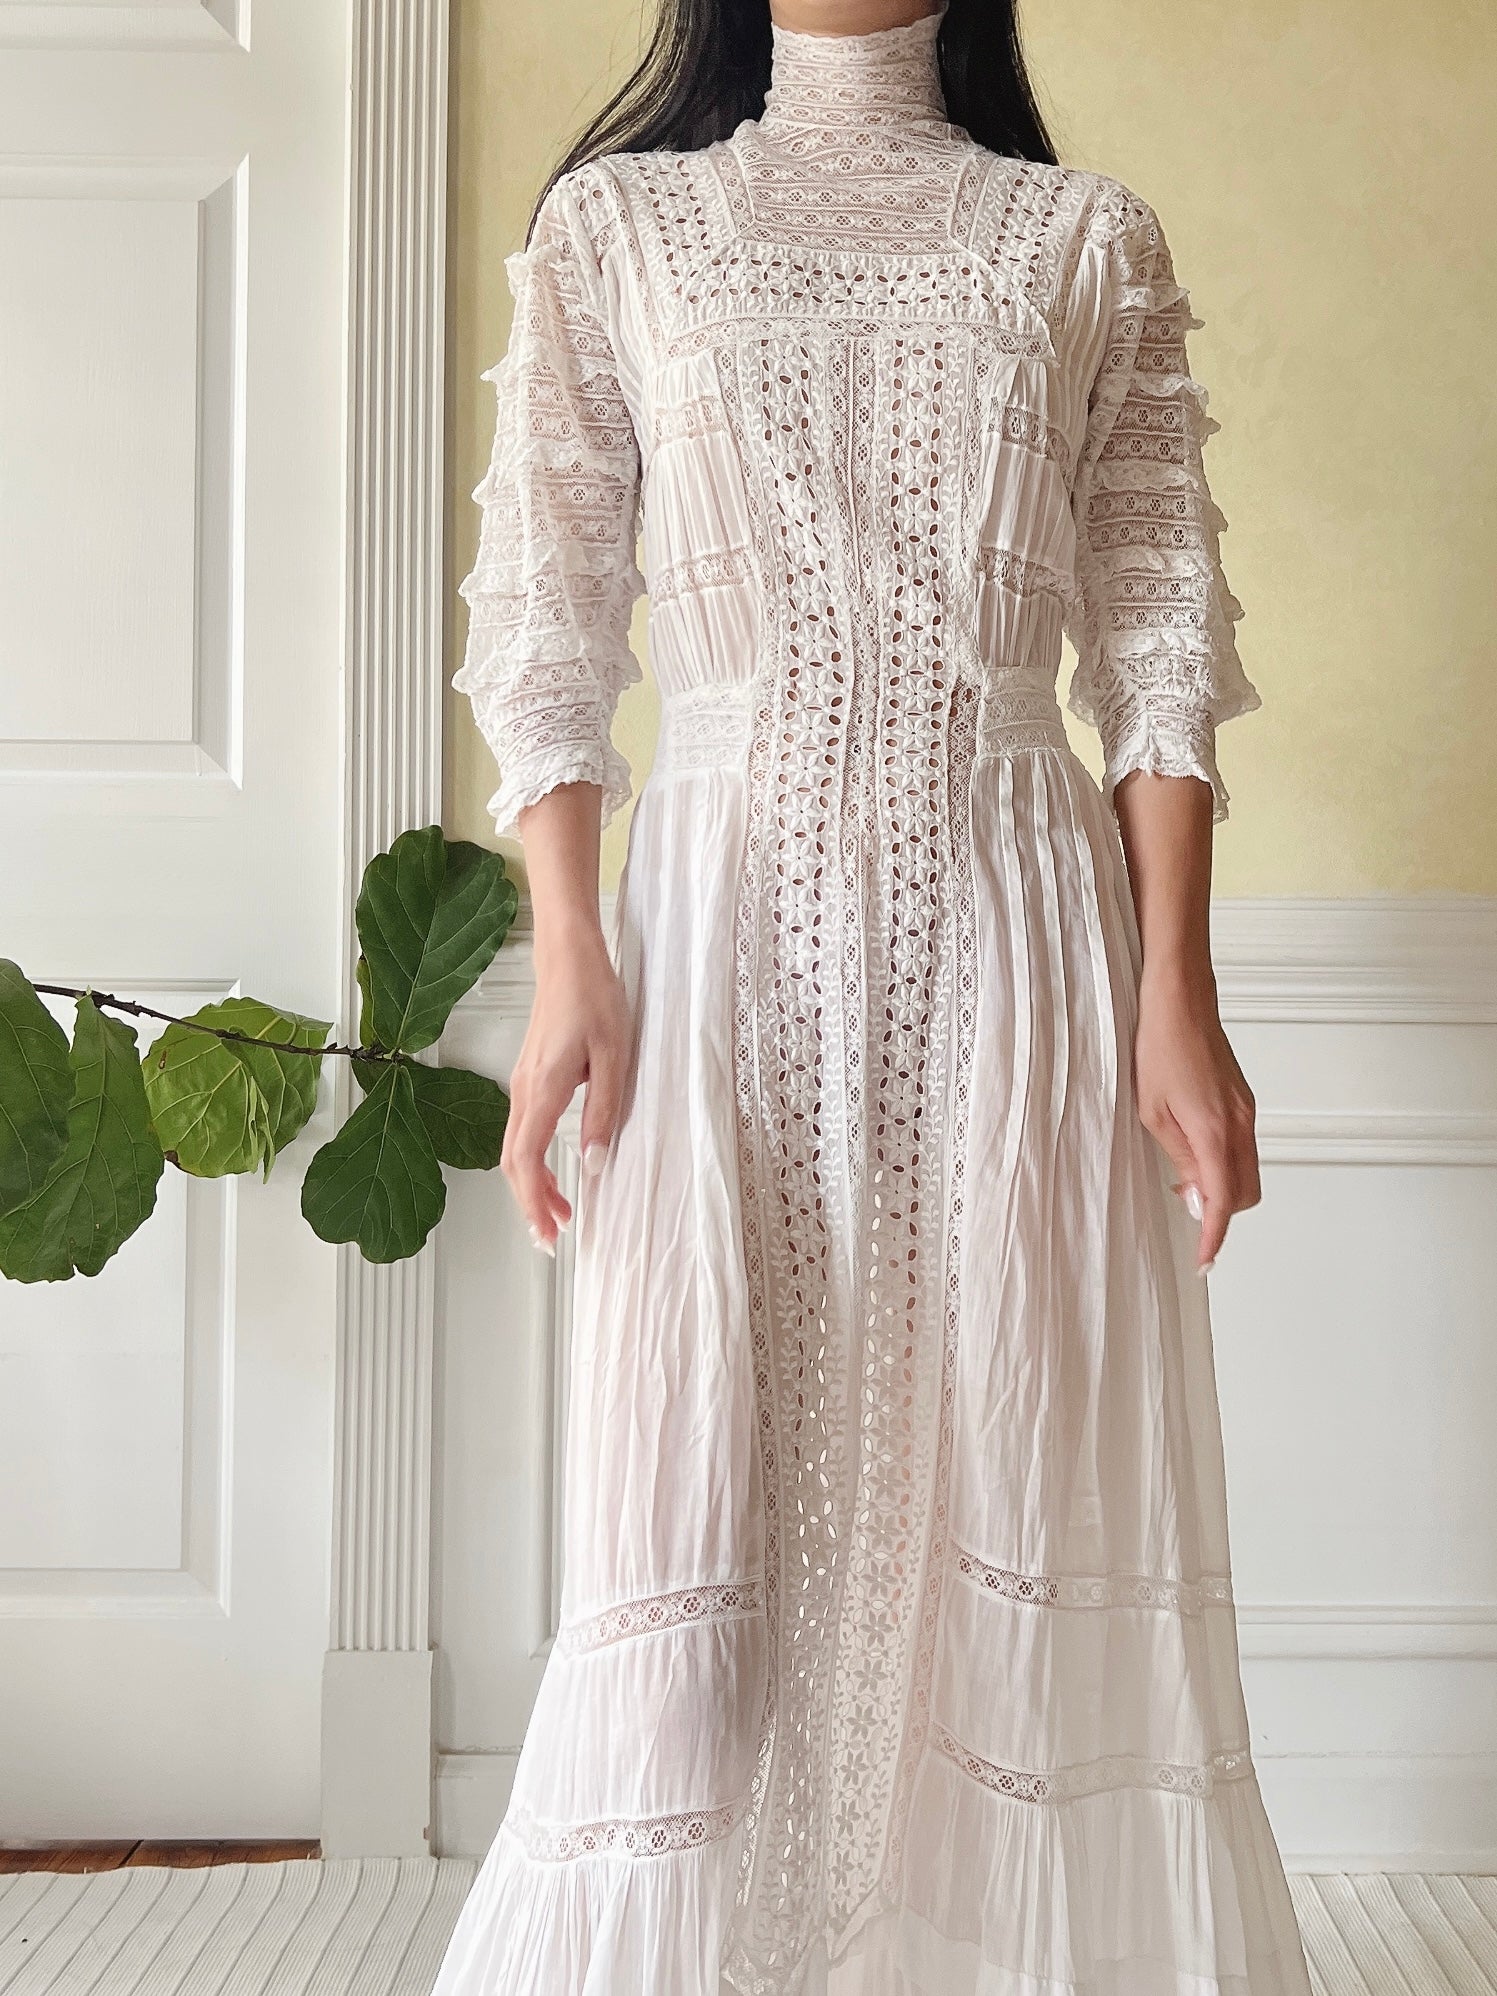 Victorian Cotton Lace and Embroidered Dress - XS